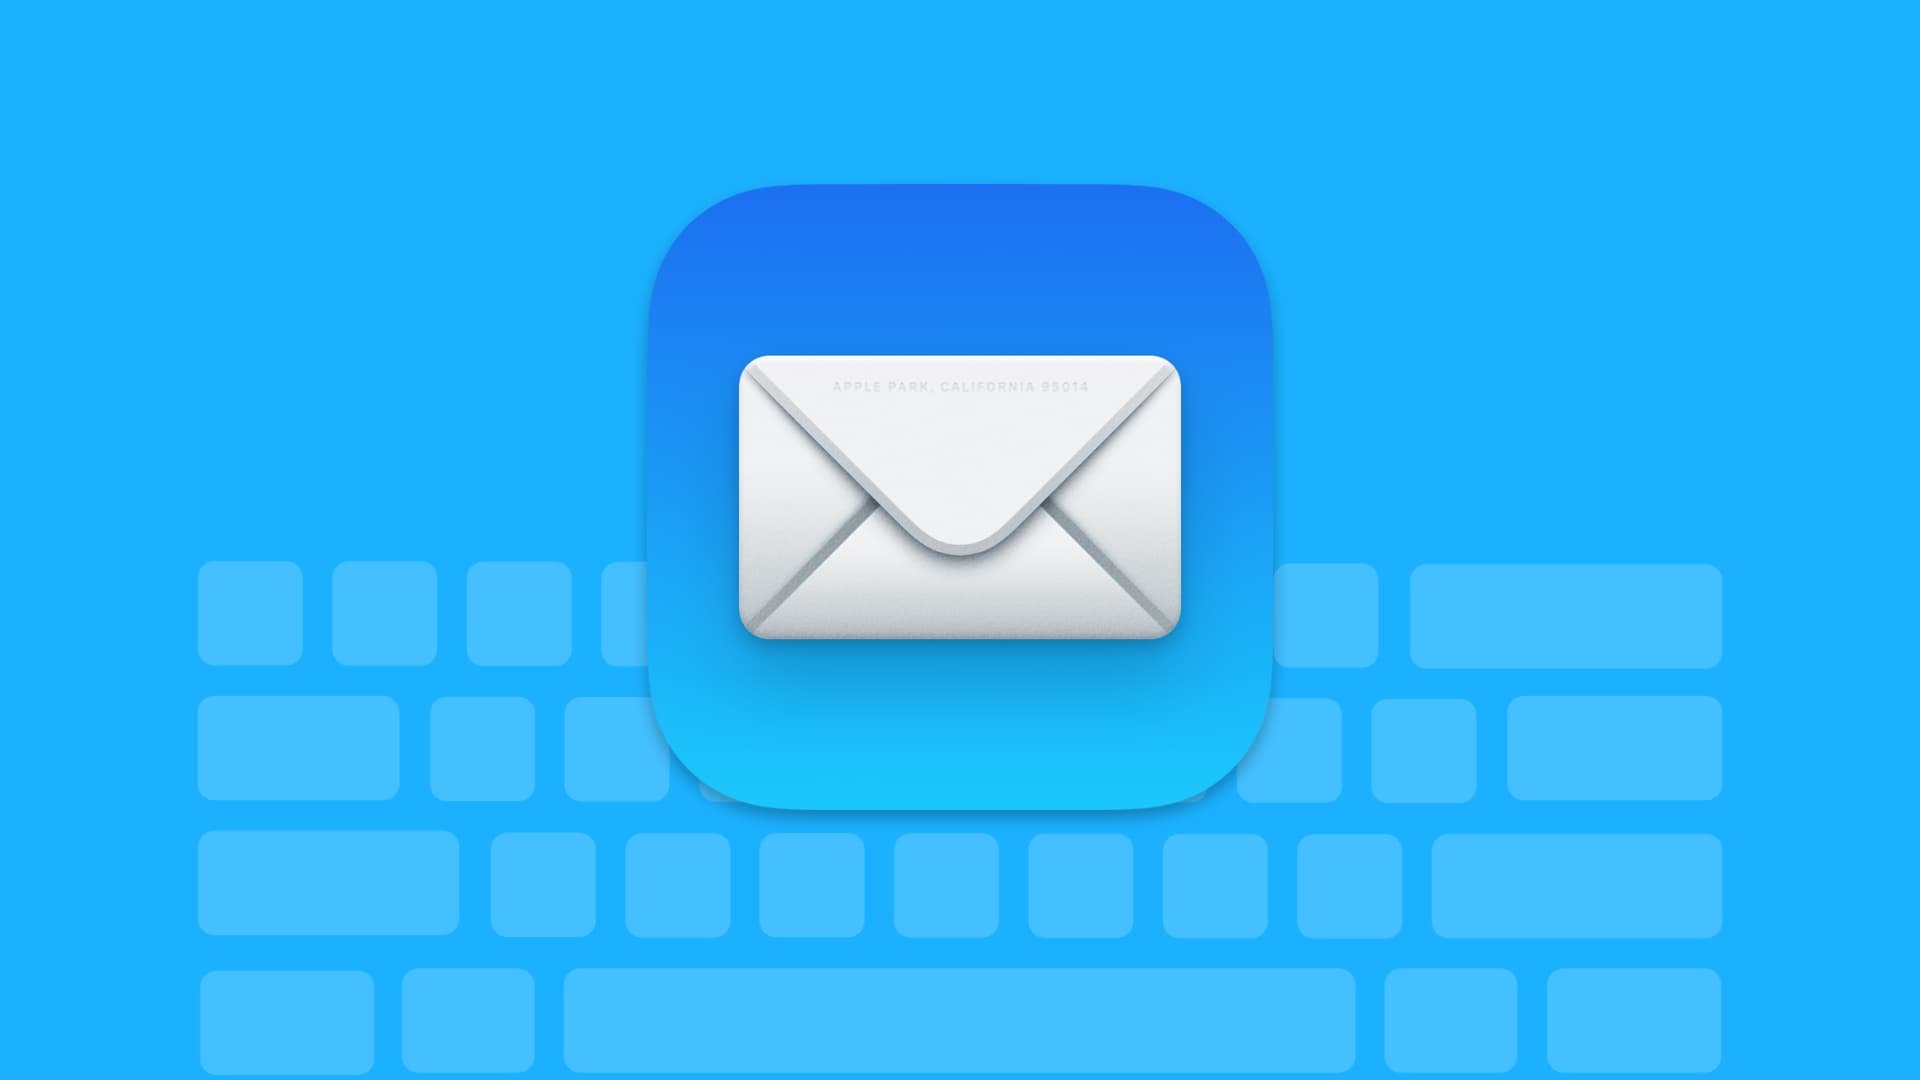 Keyboard shortcuts for the Mail app on Mac